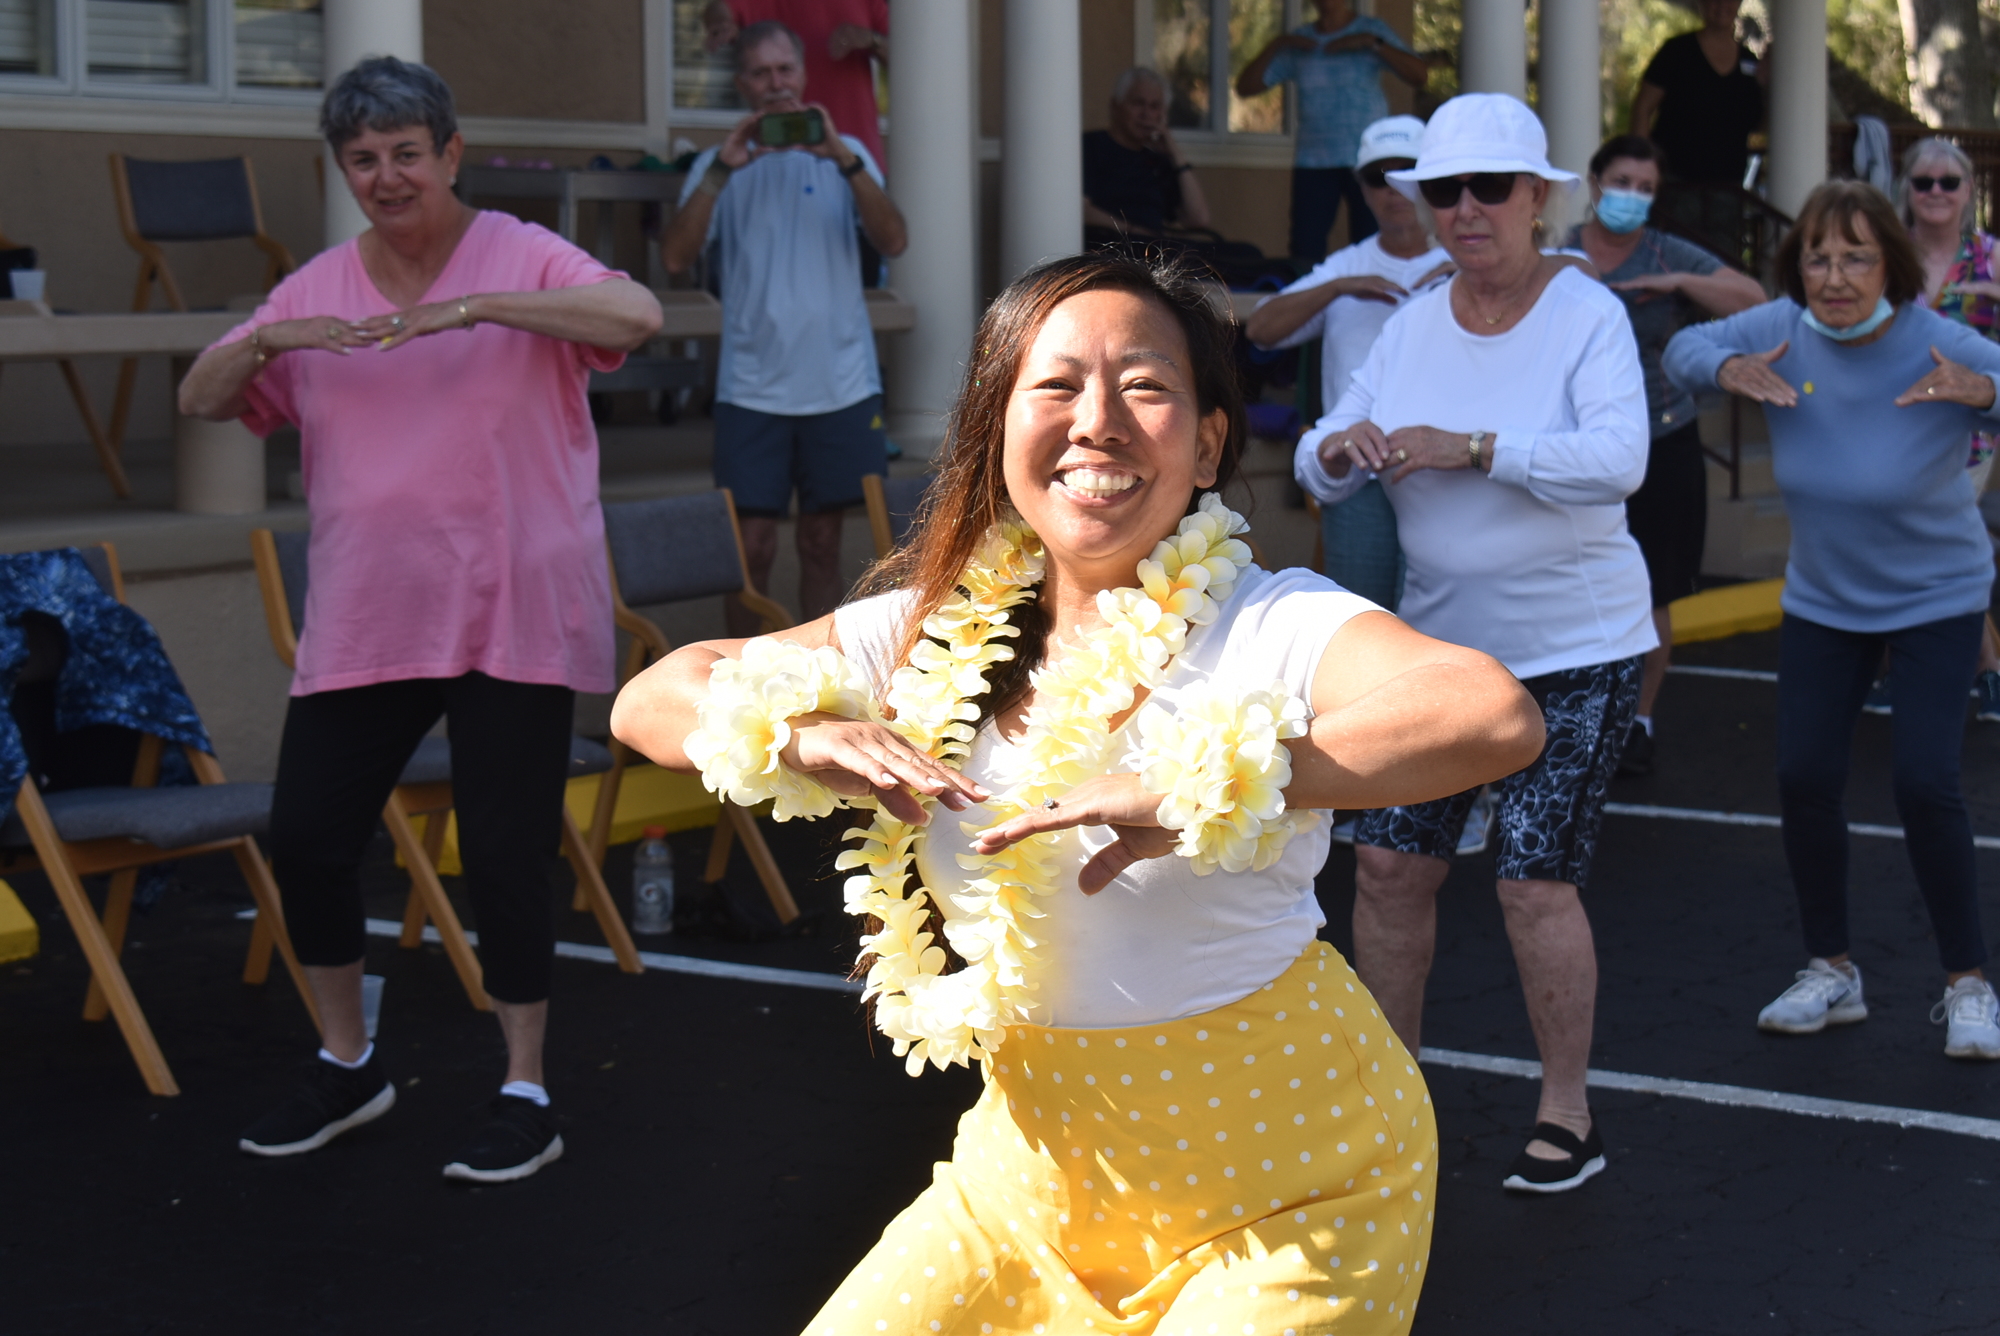 Debbie White led hula class at FitFest at The Paradise Center. File photo.